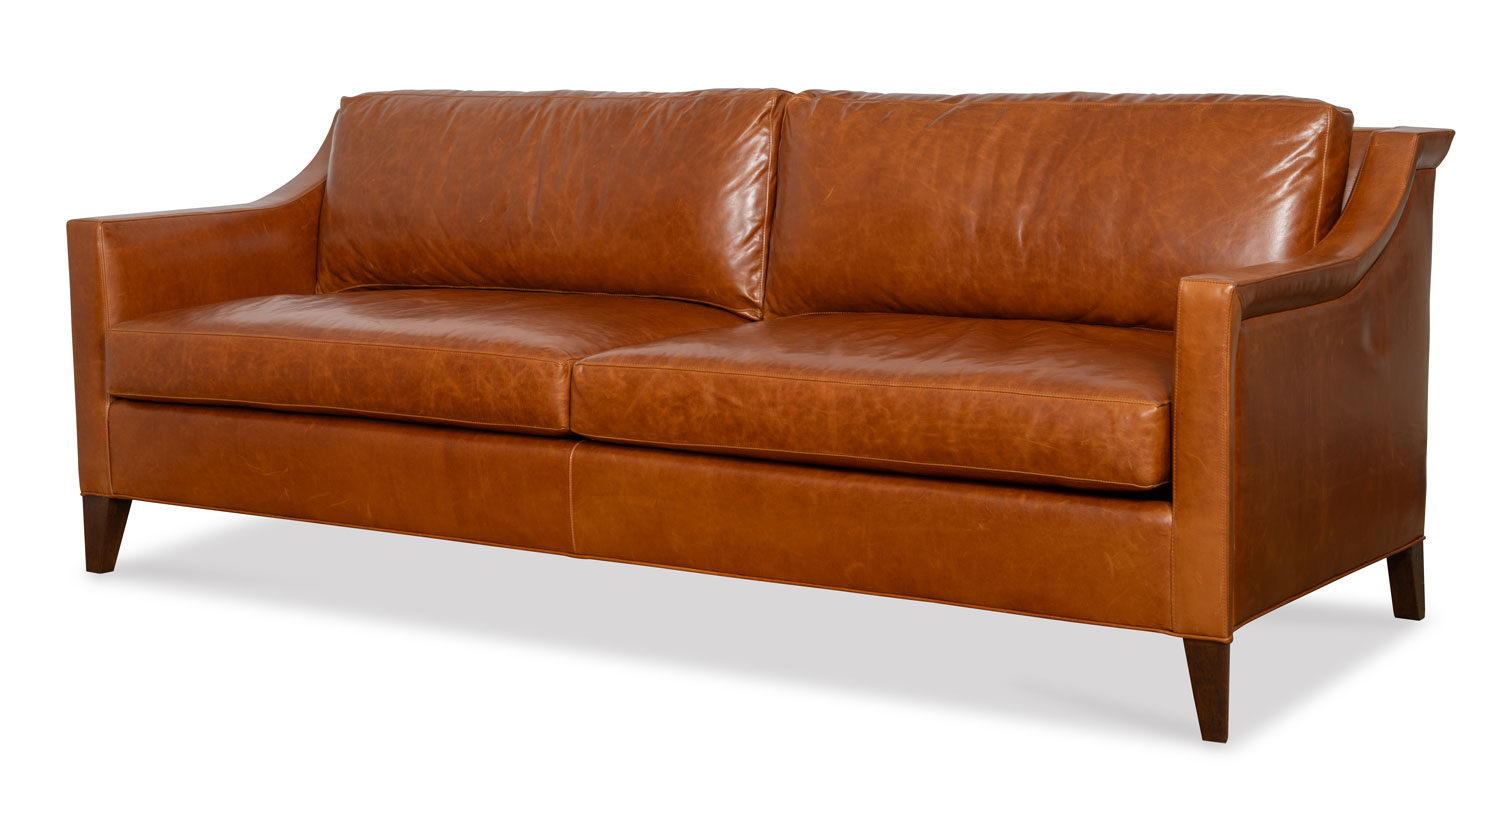 Wesley Hall L2580-90 Max Leather Sofa